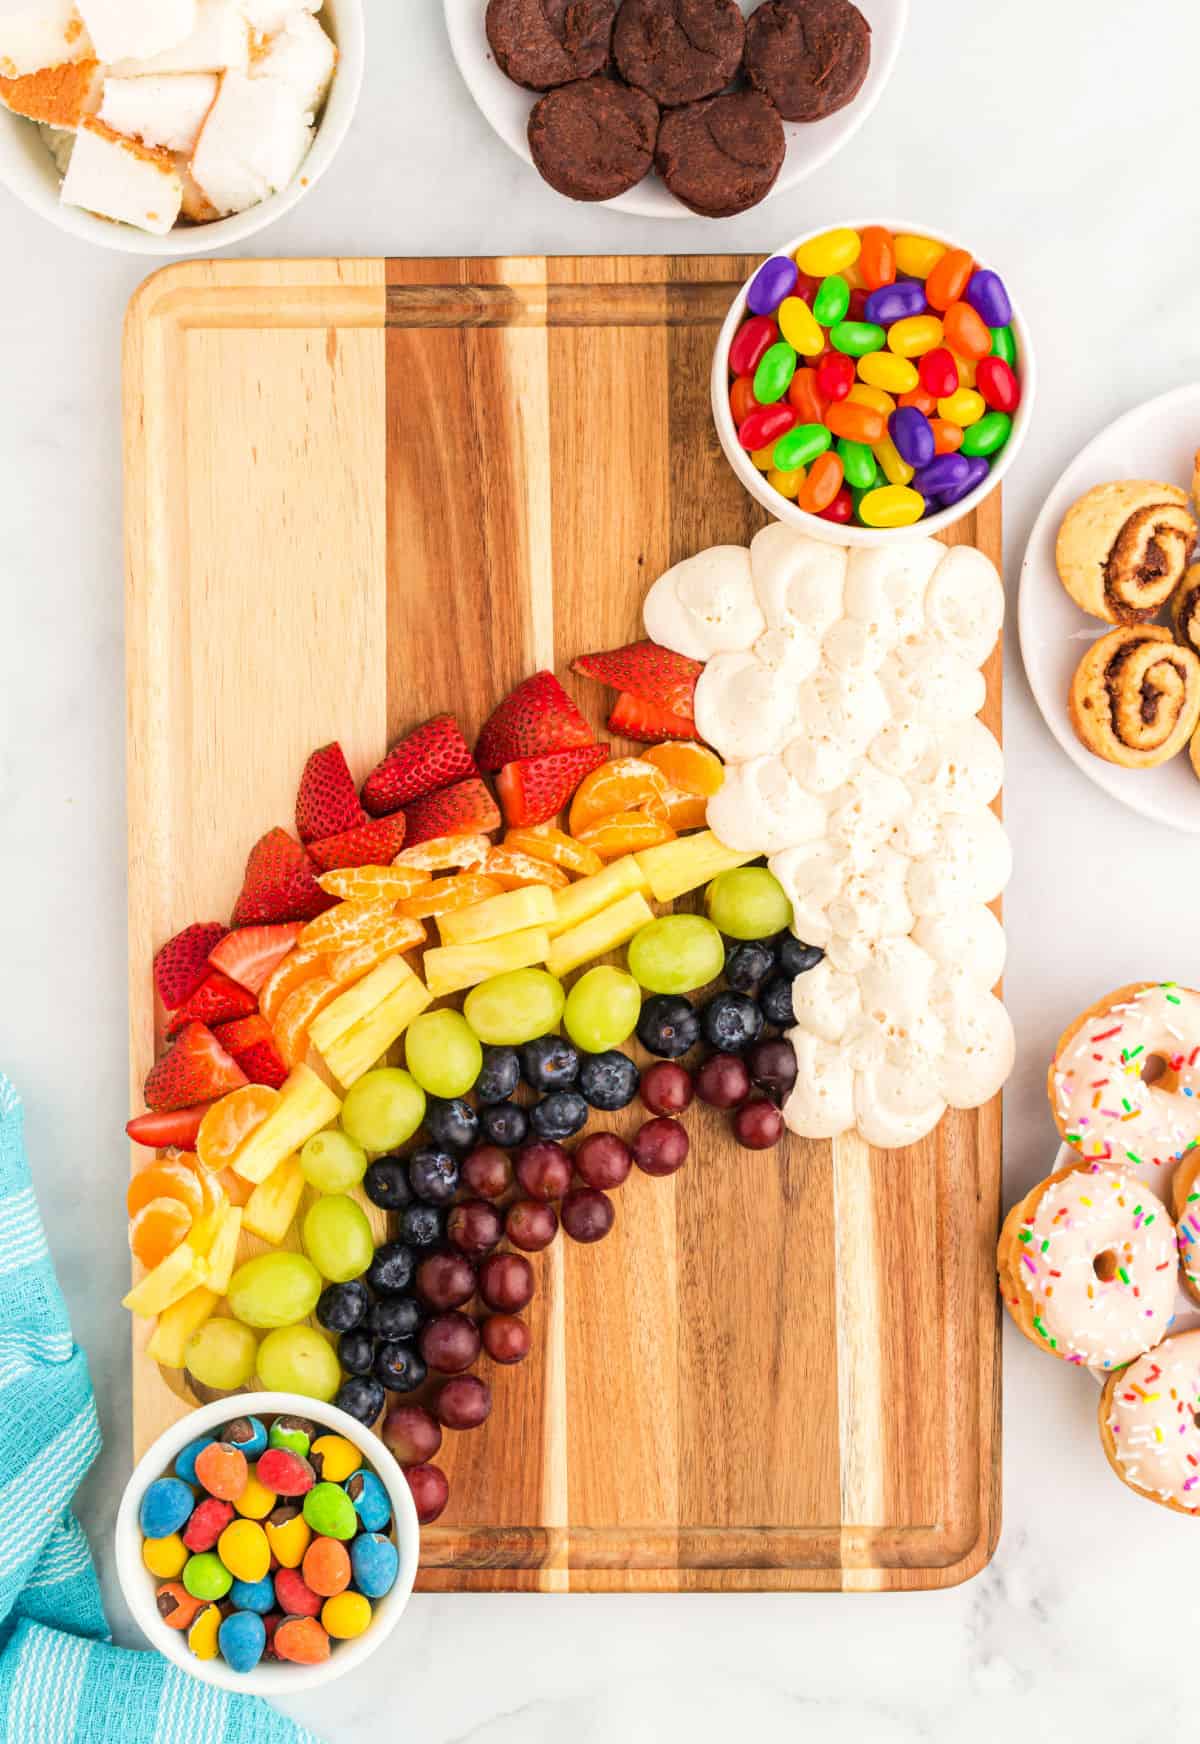 Rainbow of fruit with a cloud of frosting on a wooden board.